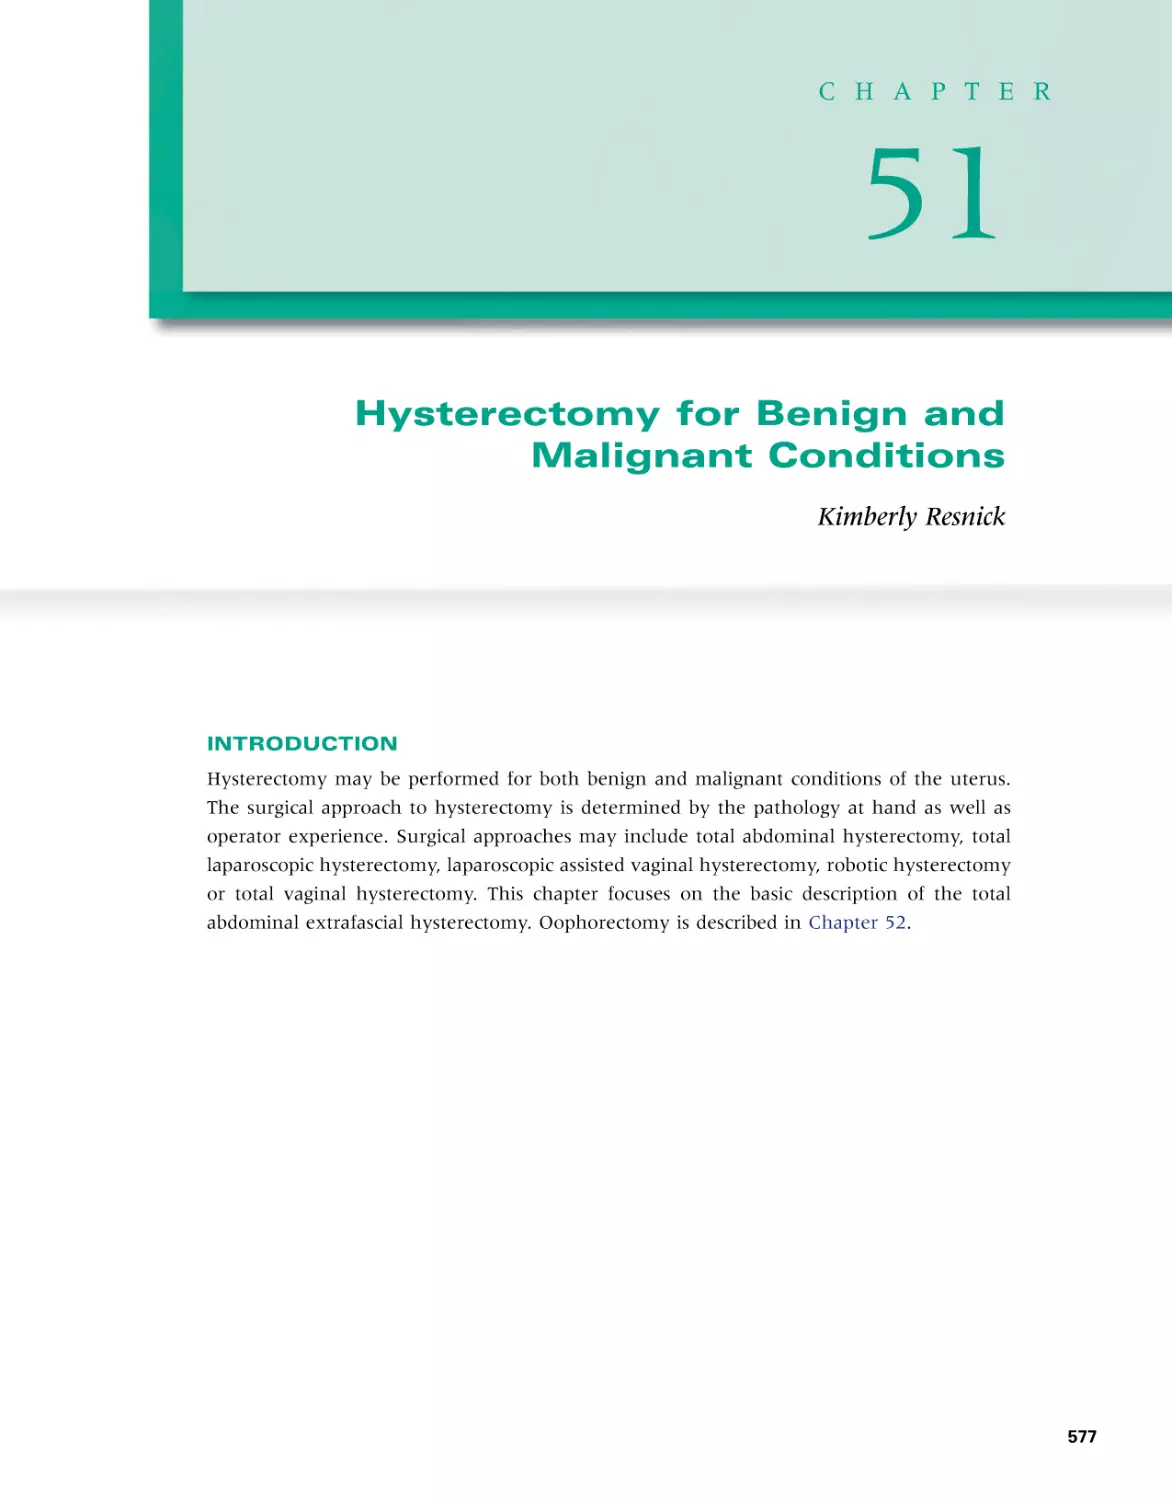 51 Hysterectomy for Benign and Malignant Conditions
Introduction